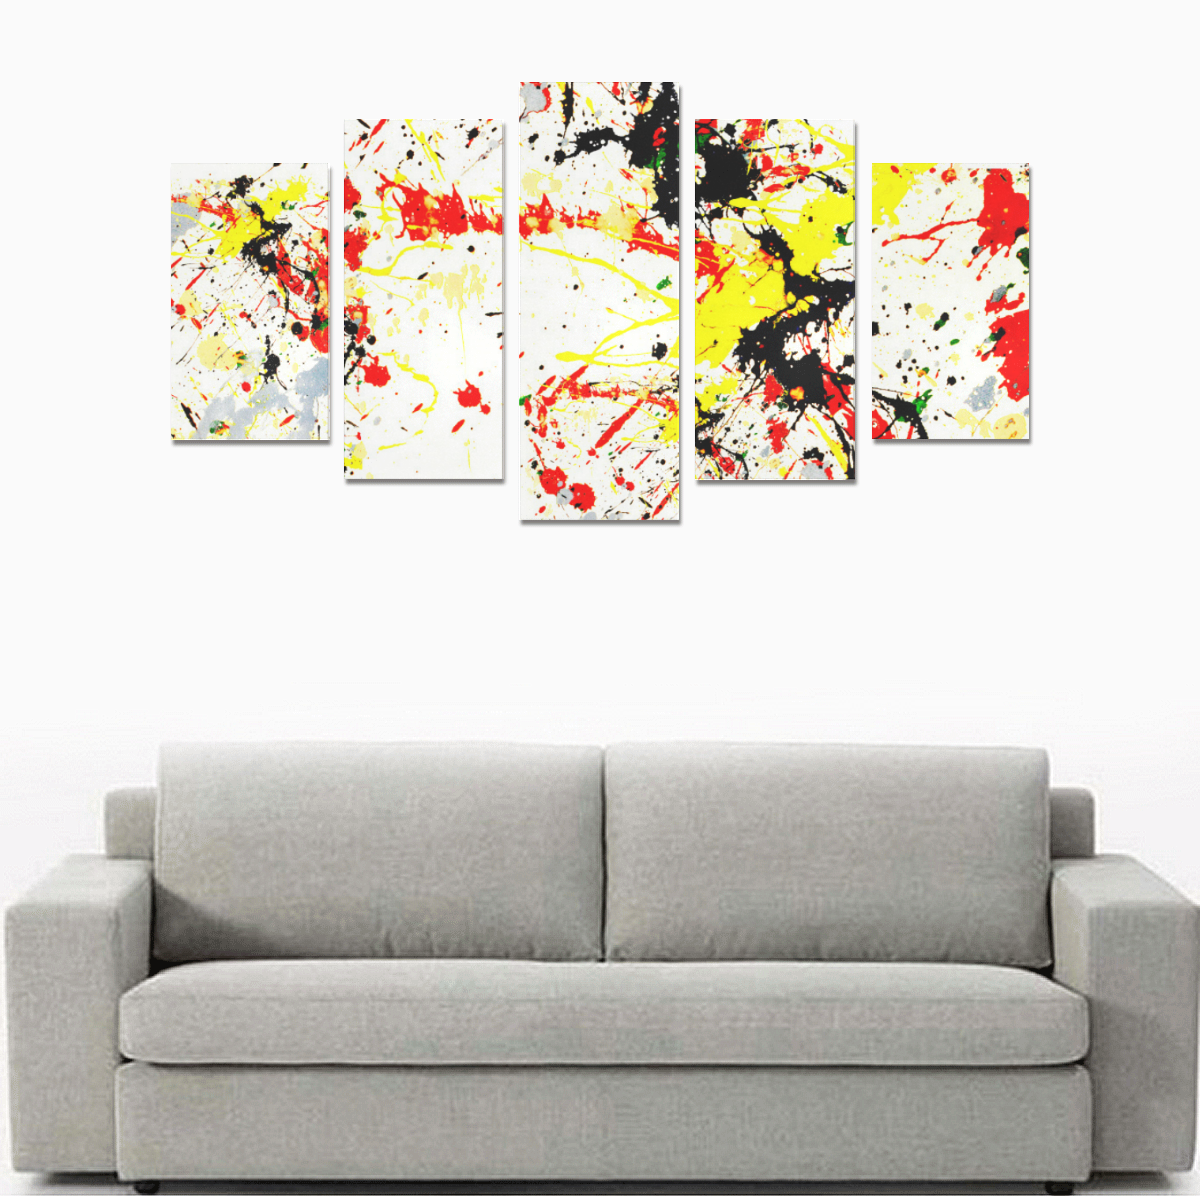 Black, Red, Yellow Paint Splatter Canvas Print Sets A (No Frame)